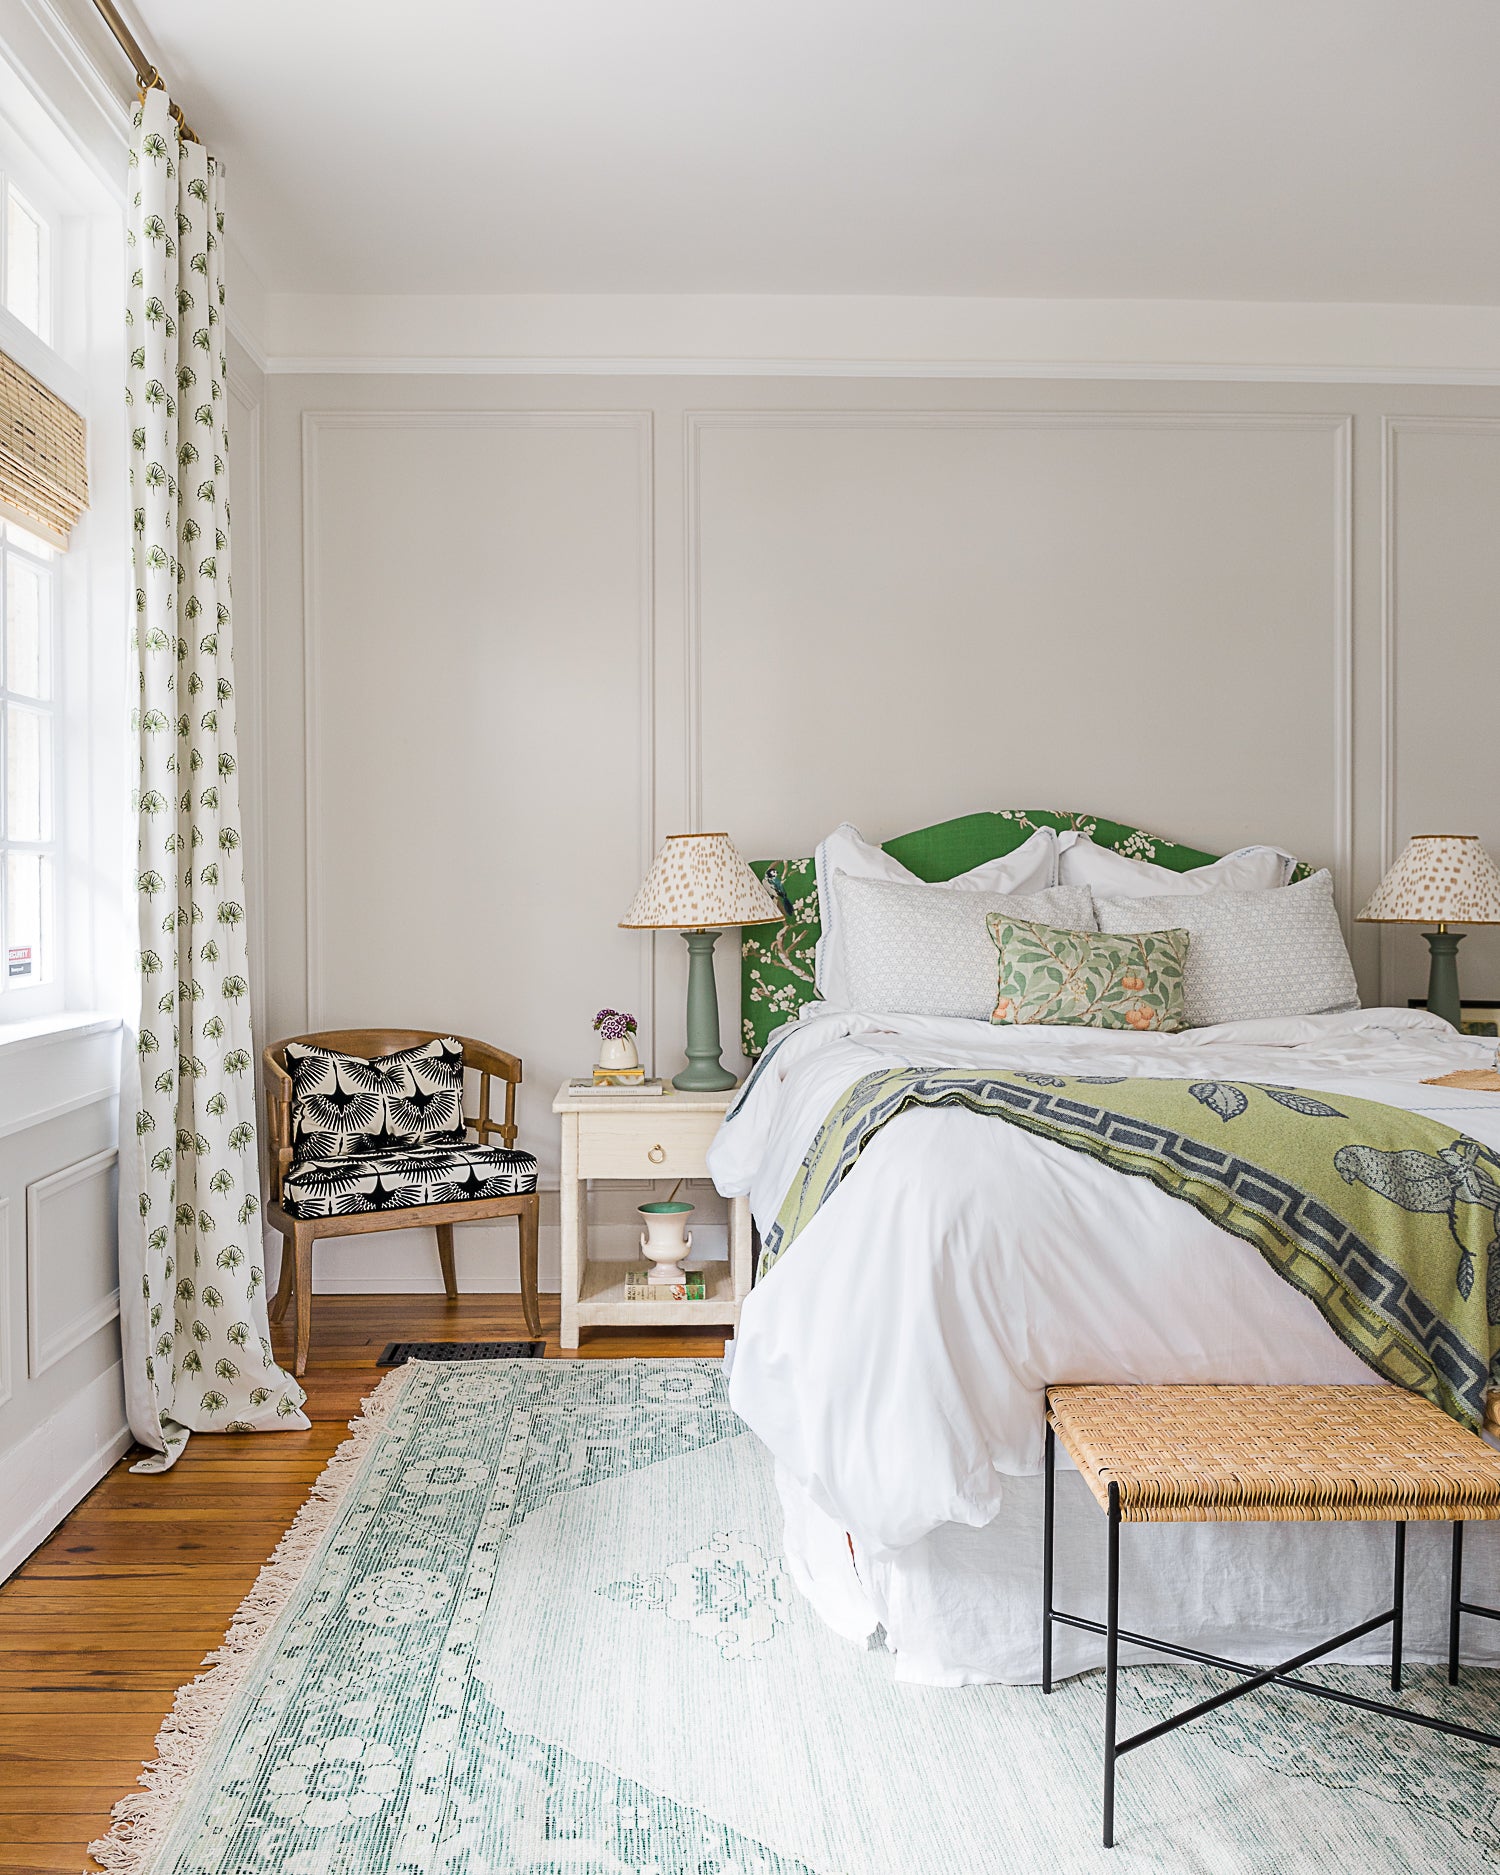 Bedroom with a white bed over rug on wooden floor next to white nightstand with green and white lamp on top next to illuminated window styled with Green Floral Custom Curtains